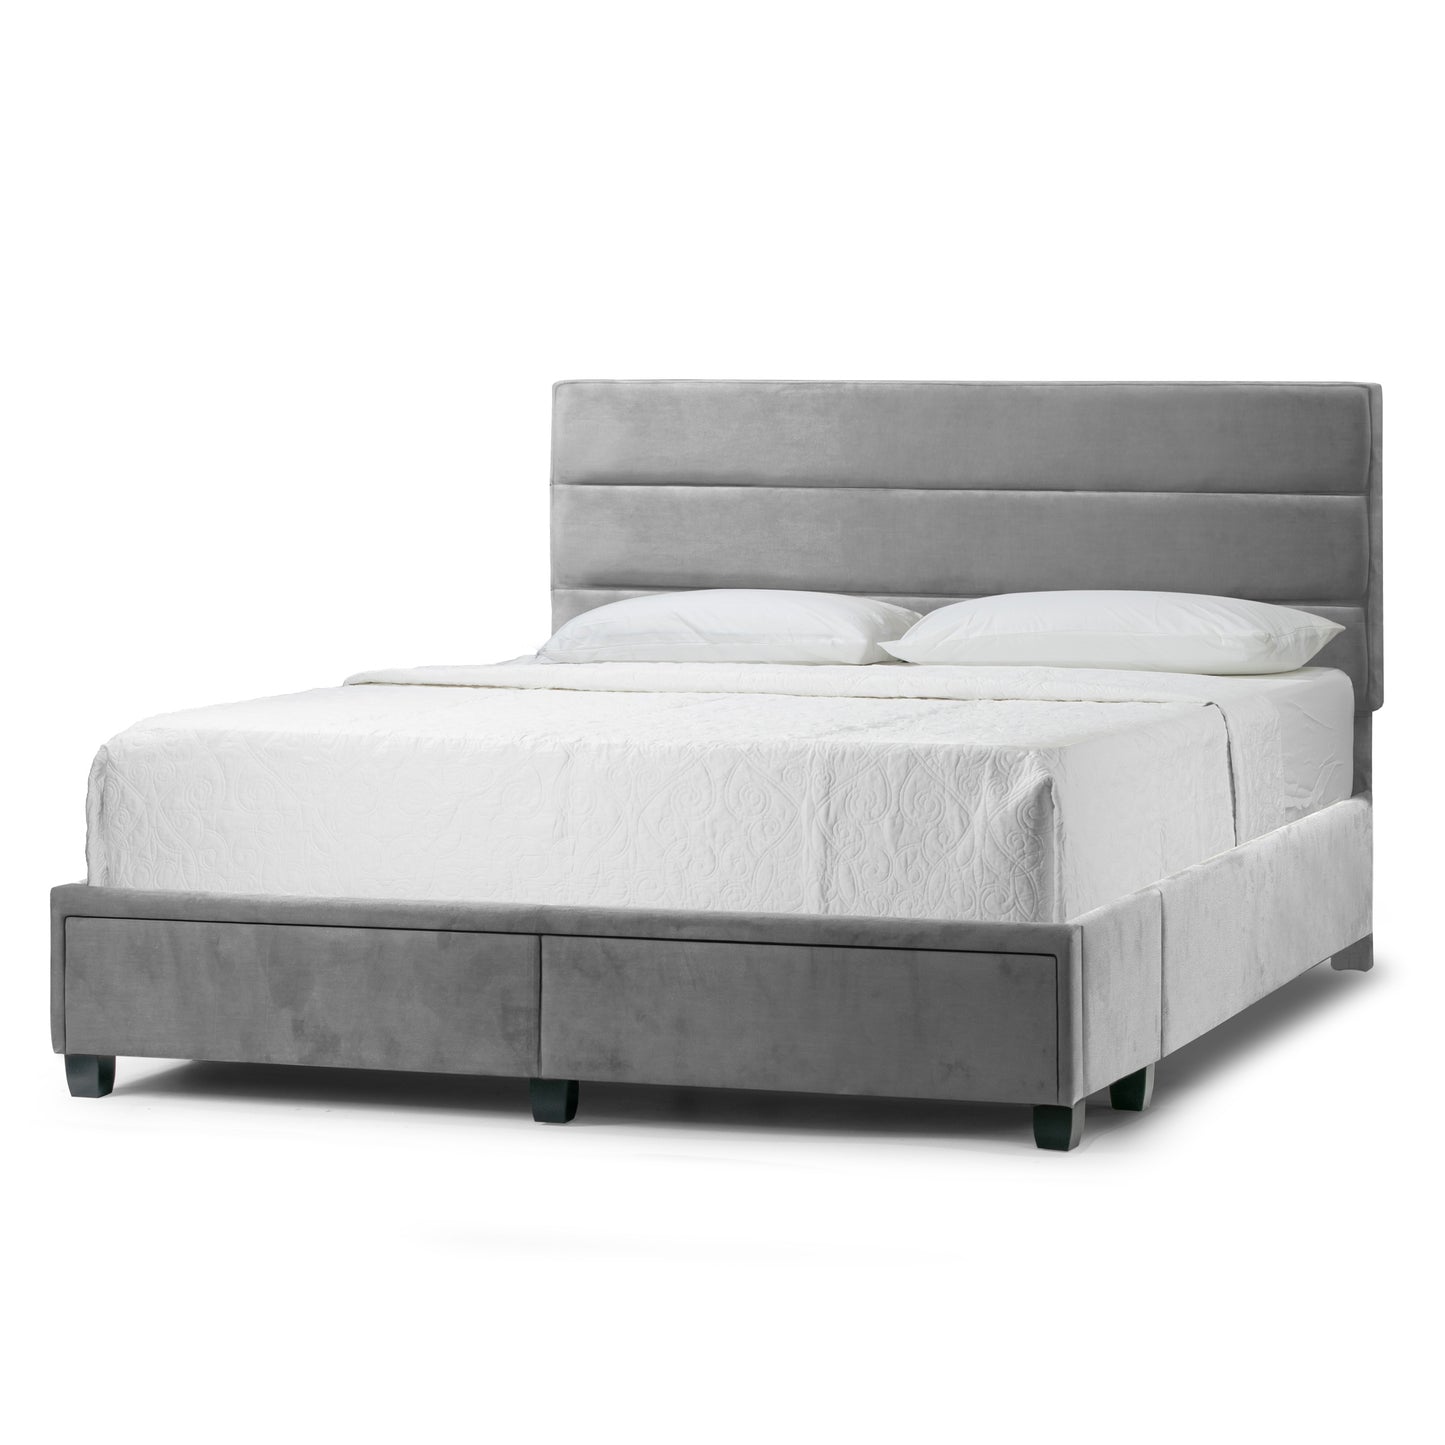 Arnia Silver Grey Queen Bed Captain’s Bed with Two Storage Drawers